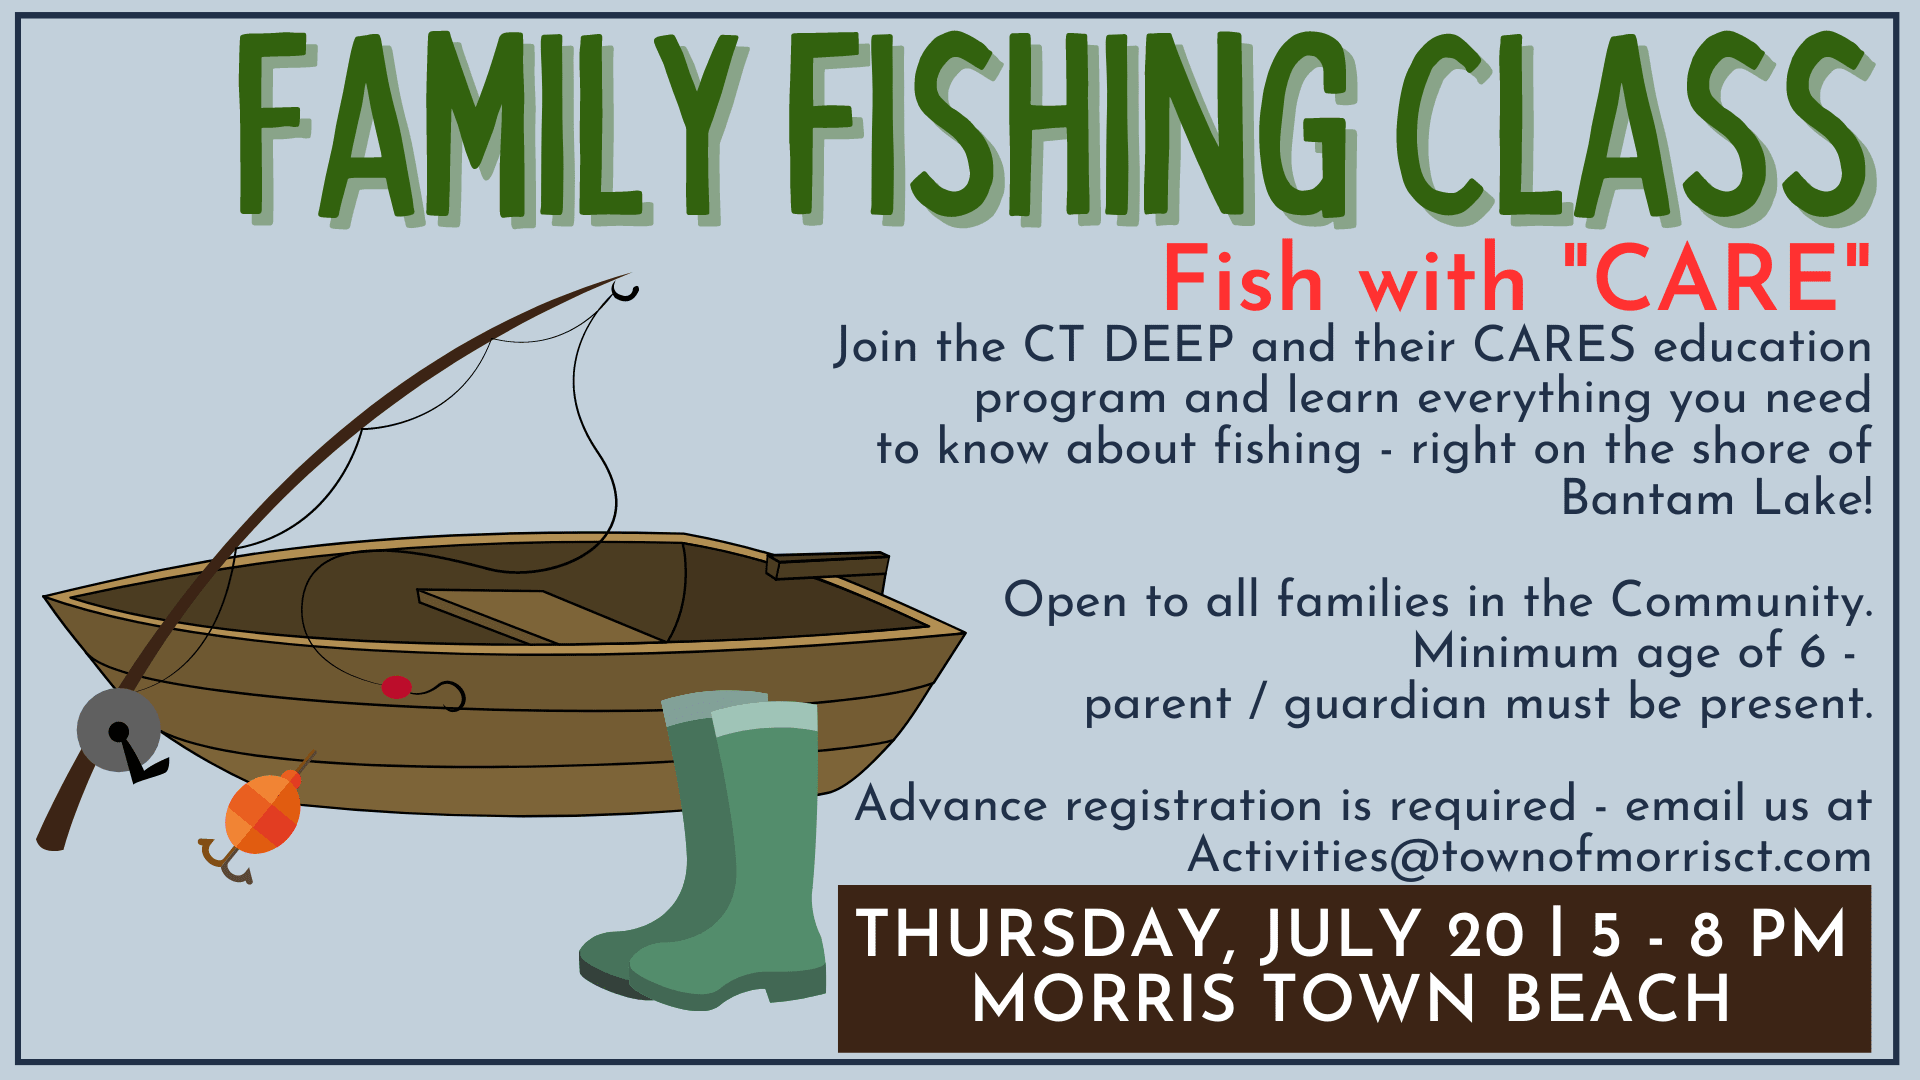 Free Family Fishing Class with DEEP's CARE Program